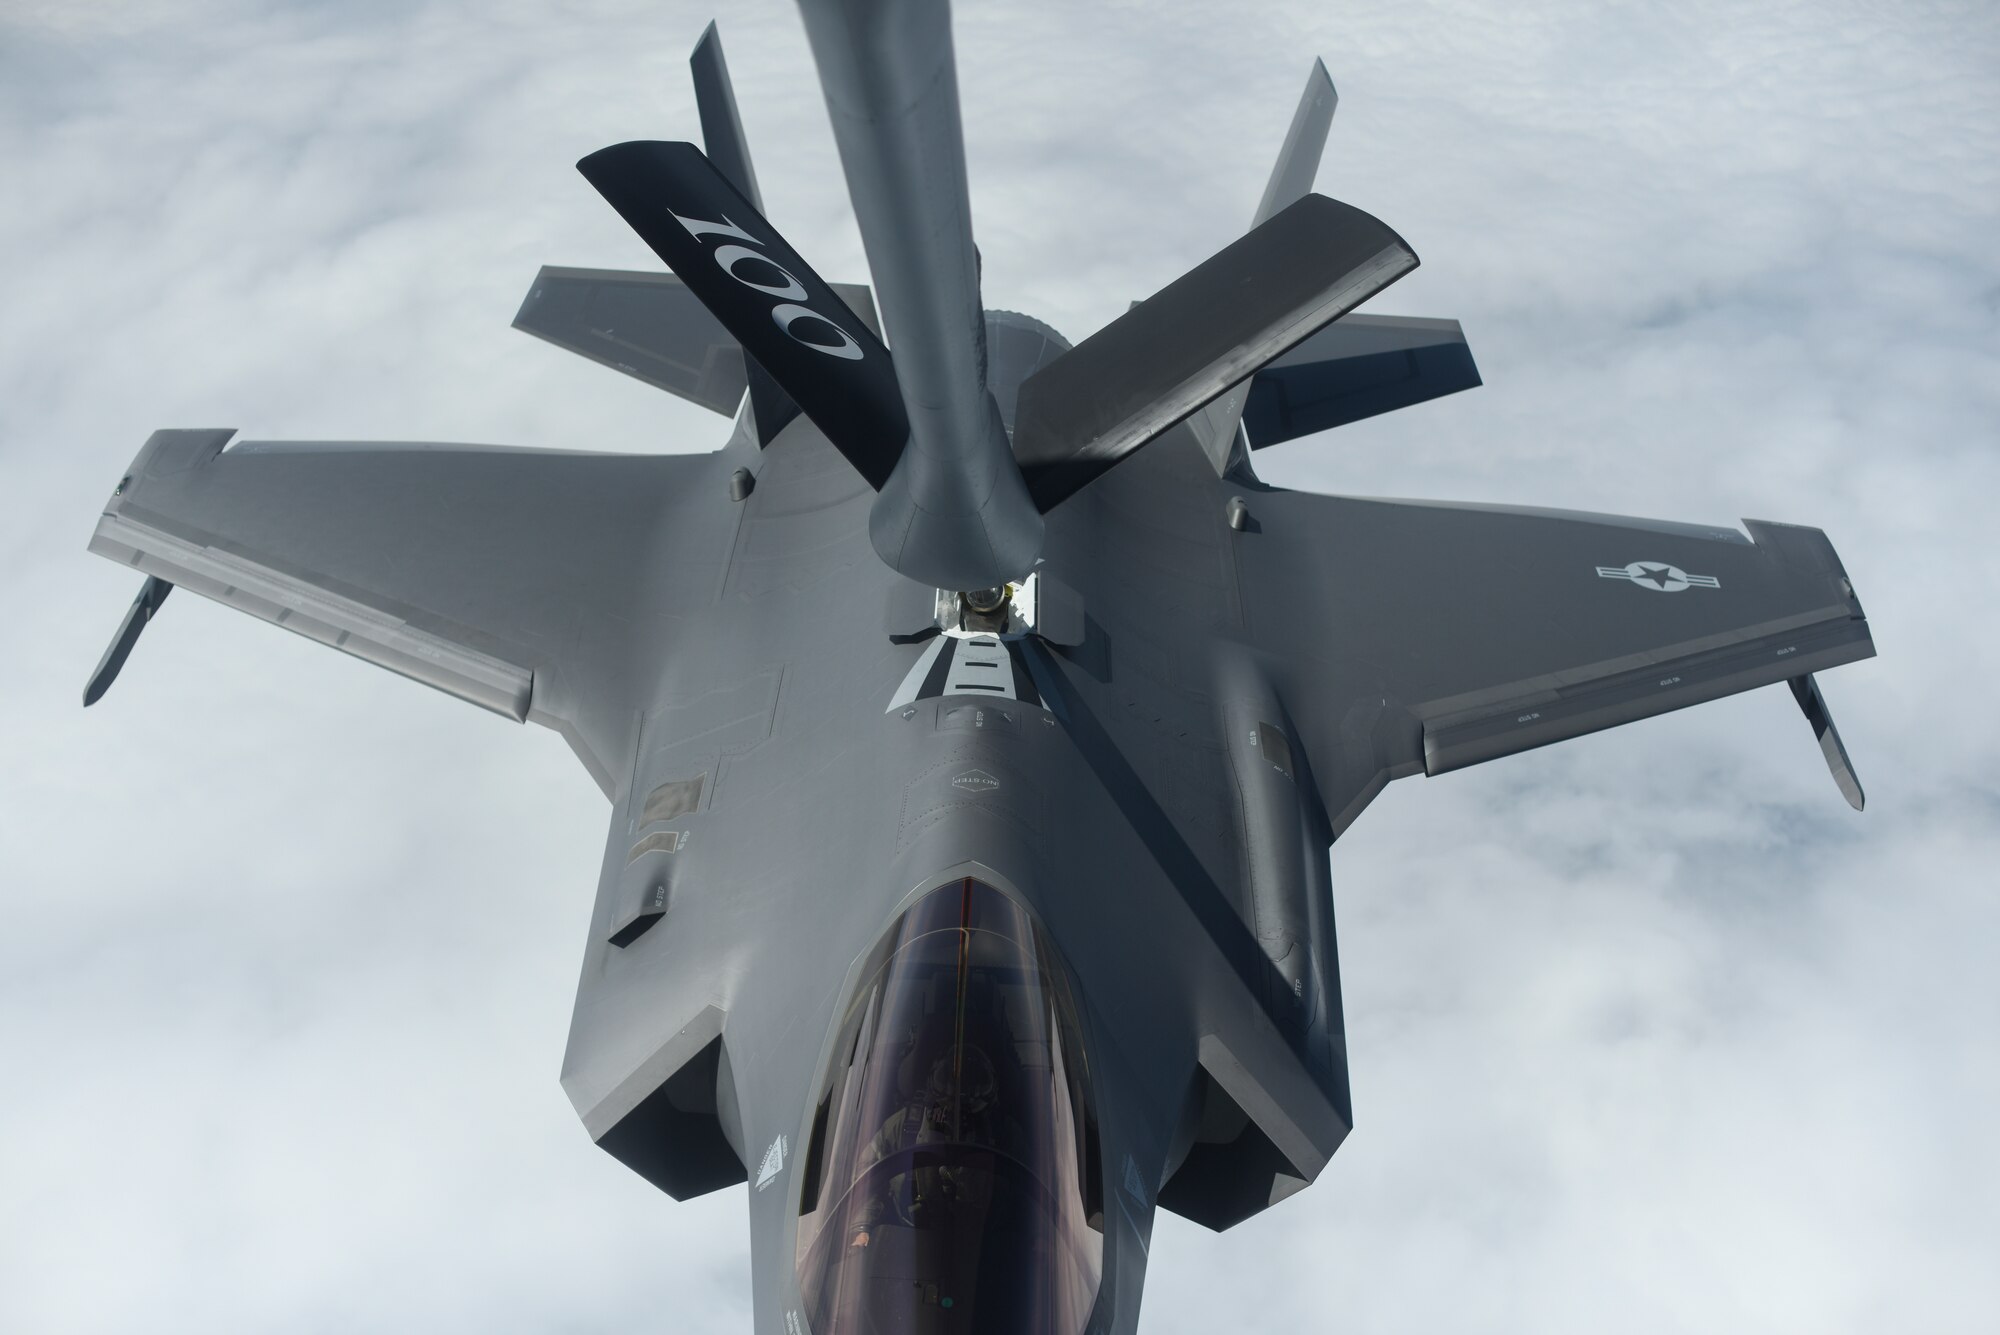 A U.S. Air Force F-35A Lighting II assigned to the 388th Fighter Wing, Hill Air Force Base, Utah, receives fuel from a KC-135 Stratotanker assigned to the 351st Air Refueling Squadron, RAF Mildenhall, England, over the Baltic Sea July 13, 2019. The F-35s conducted training with other U.S. Air Forces and partner-nation aircraft as part of a Theater Security Package deployment to Europe. (U.S. Air Force photo by Airman 1st Class Joseph Barron)